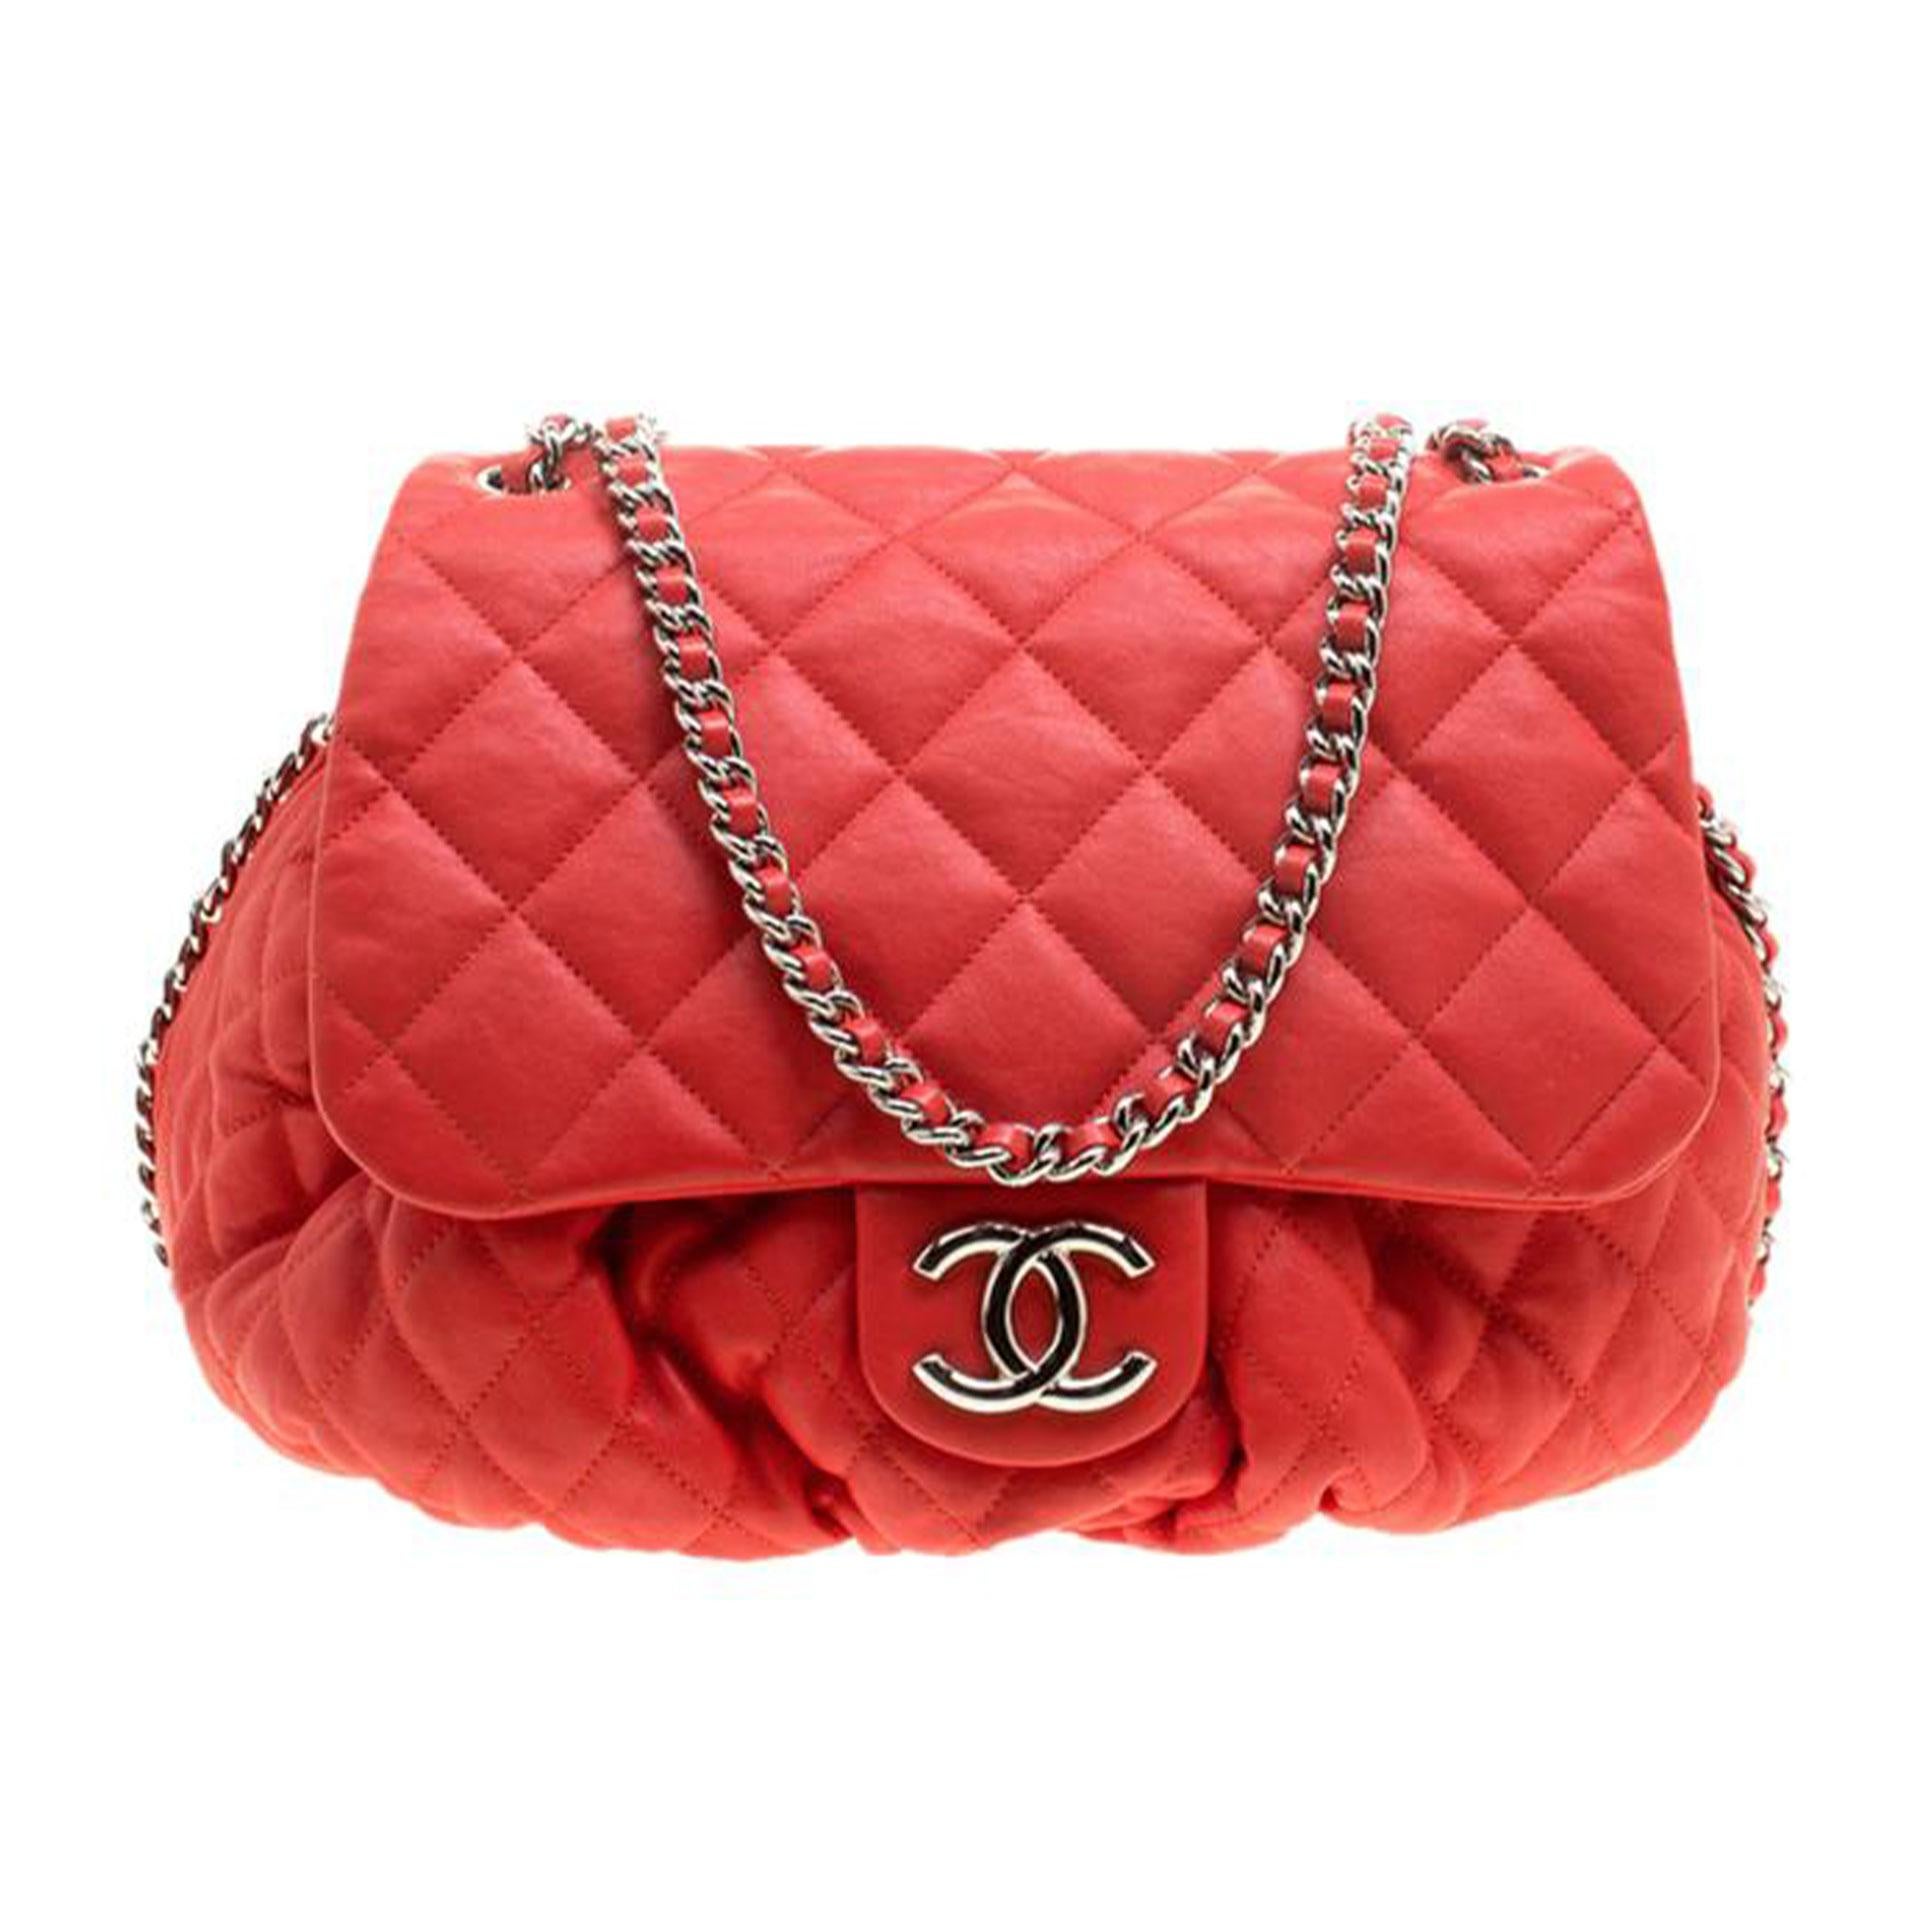 chanel bag with chain around it